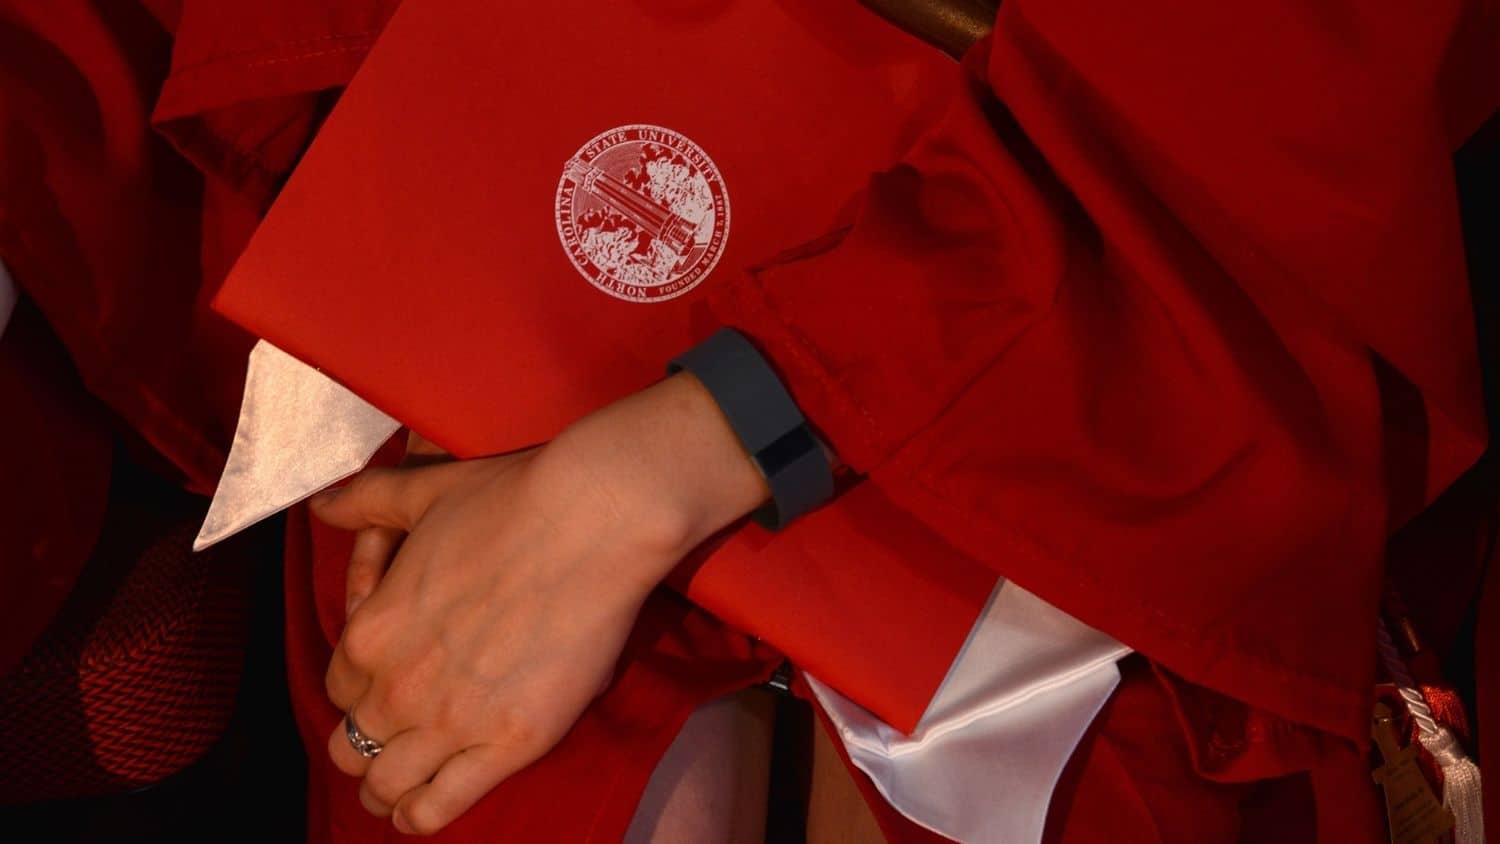 An NC State student displays their cap and gown.